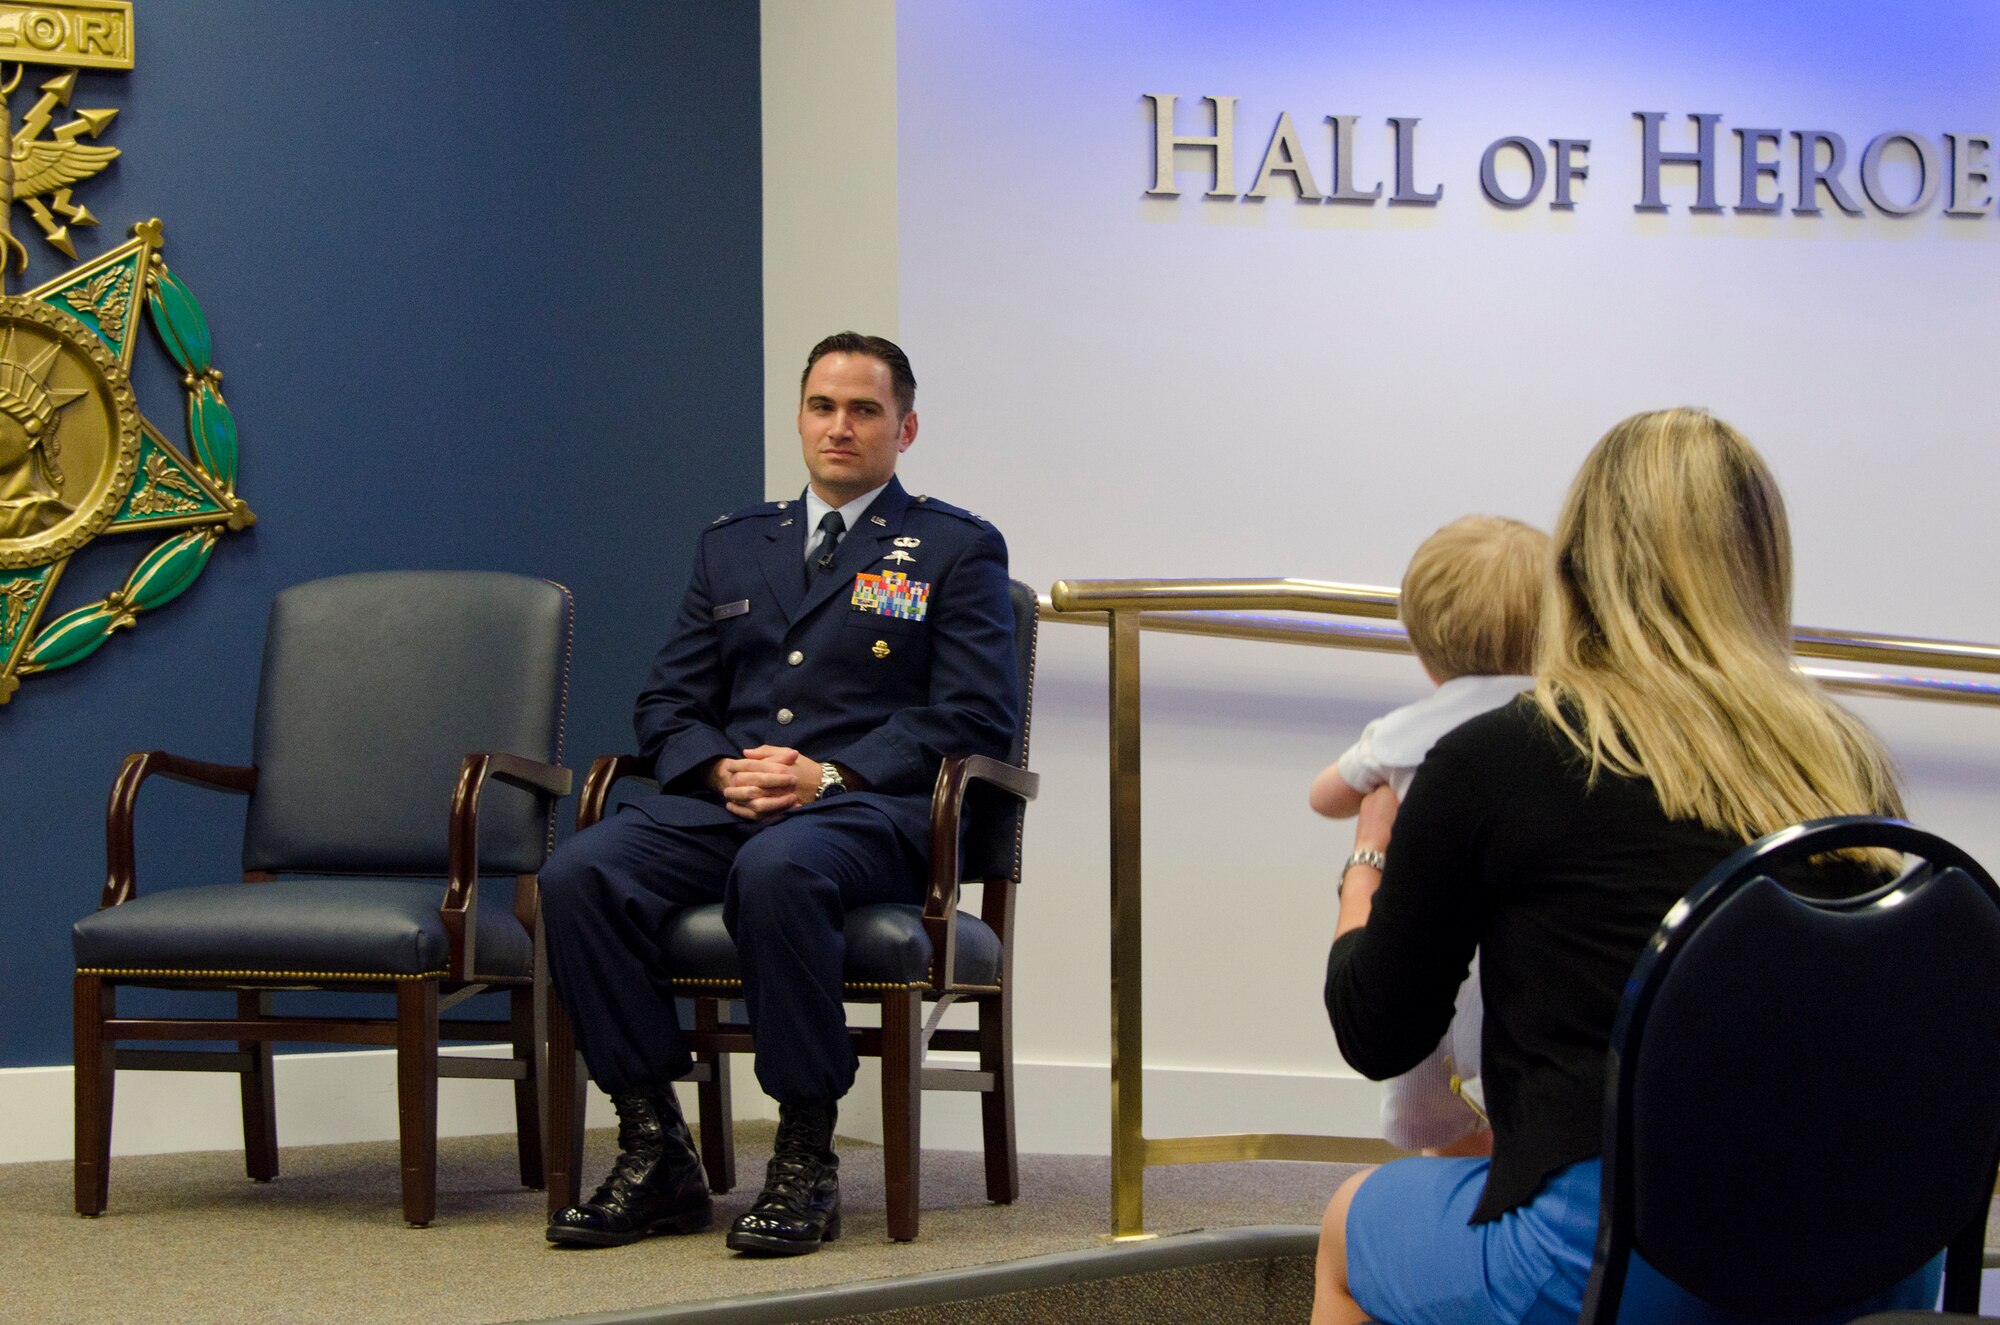 Captain Barry F. Crawford, Jr. from the Maryland Air National Guard, 175th Wing is watching his son and wife while waiting to be awarded the Air Force Cross and Purple Heart today at a ceremony hosted by Air Force Chief of Staff General Norton Schwartz at the Pentagon's Hall of Heroes, April 12, 2012. He was awarded the above medals for his extraordinary heroism in military operations against an armed enemy of the United States as Special Tactics Officer near Lagham Province, Afghanistan, on May 4, 2010. Captain Crawford is credited for taking decisive action to save the lives of three wounded Afghan soldiers and evacuate two Afghan soldiers killed in action. Captain Crawford is fifth recipient since 9/11 to receive the Air Force Cross. (National Guard photo by Master Sgt. Ed Bard)